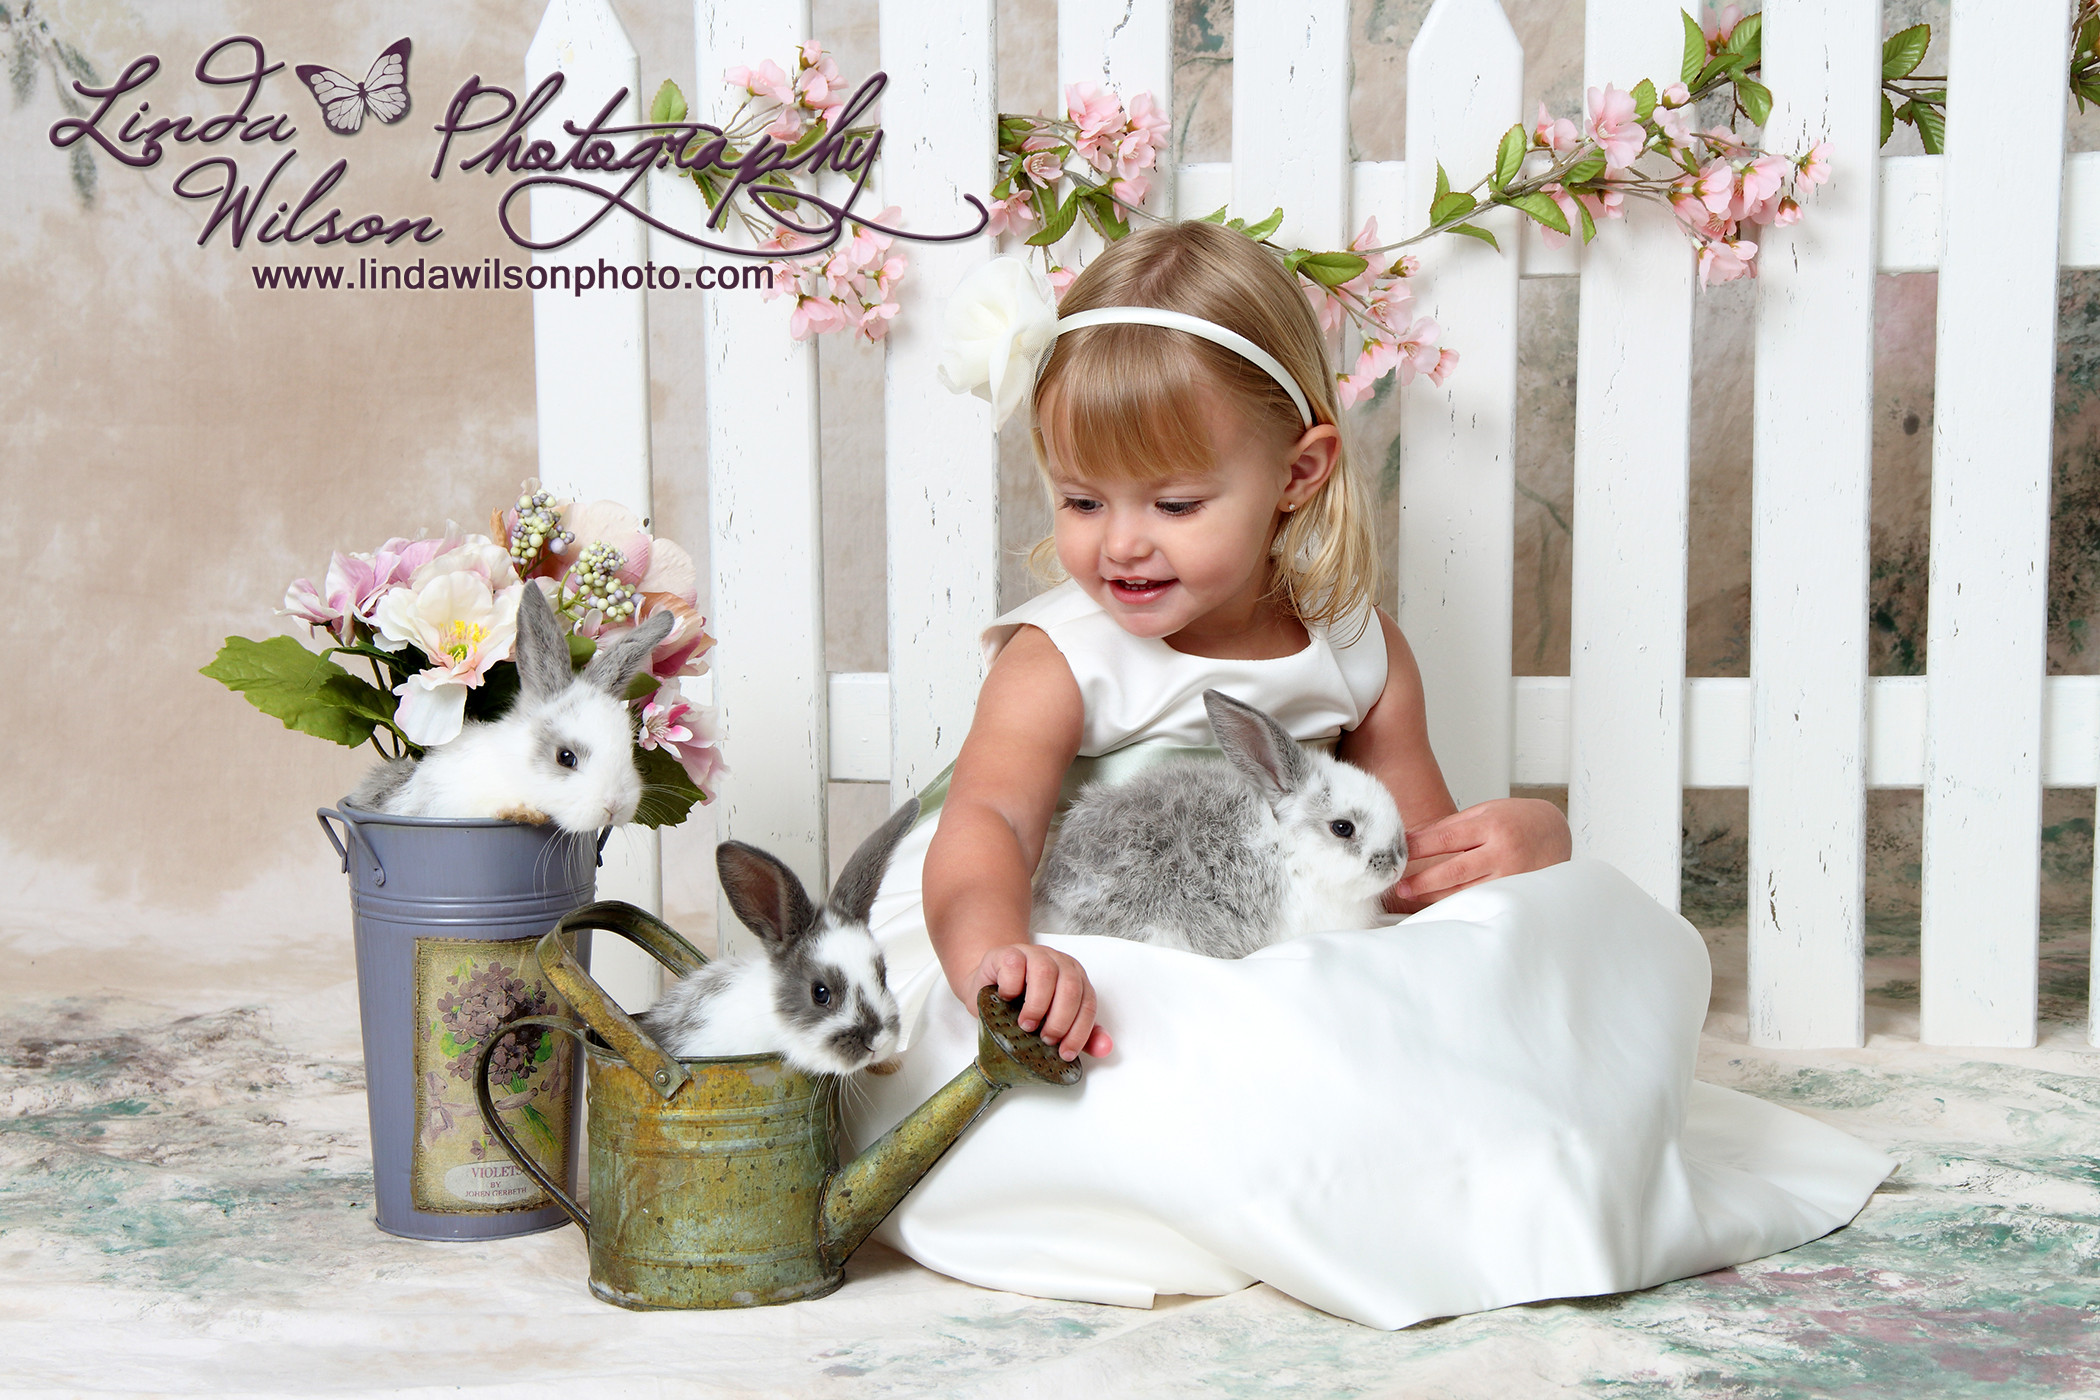 Easter Mini Session Ideas
 Easter Mini Session with Live Bunnies